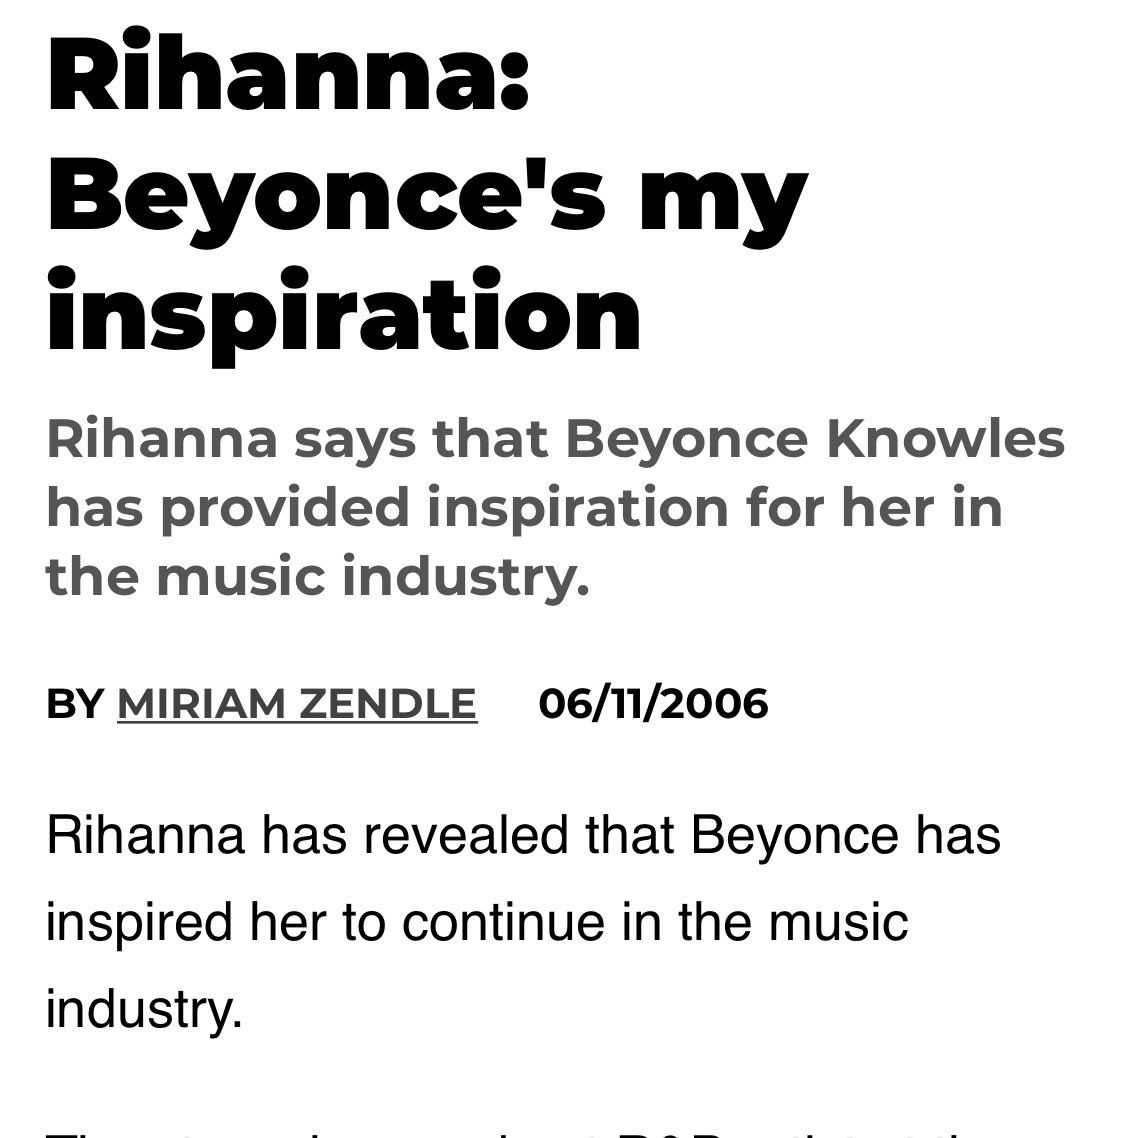 This is shown by the likes of Ariana Grande and Lady Gaga, who have admitted they were inspired to start singing because of her, as well as Rihanna, who Beyoncé played a role in helping get signed to a label.